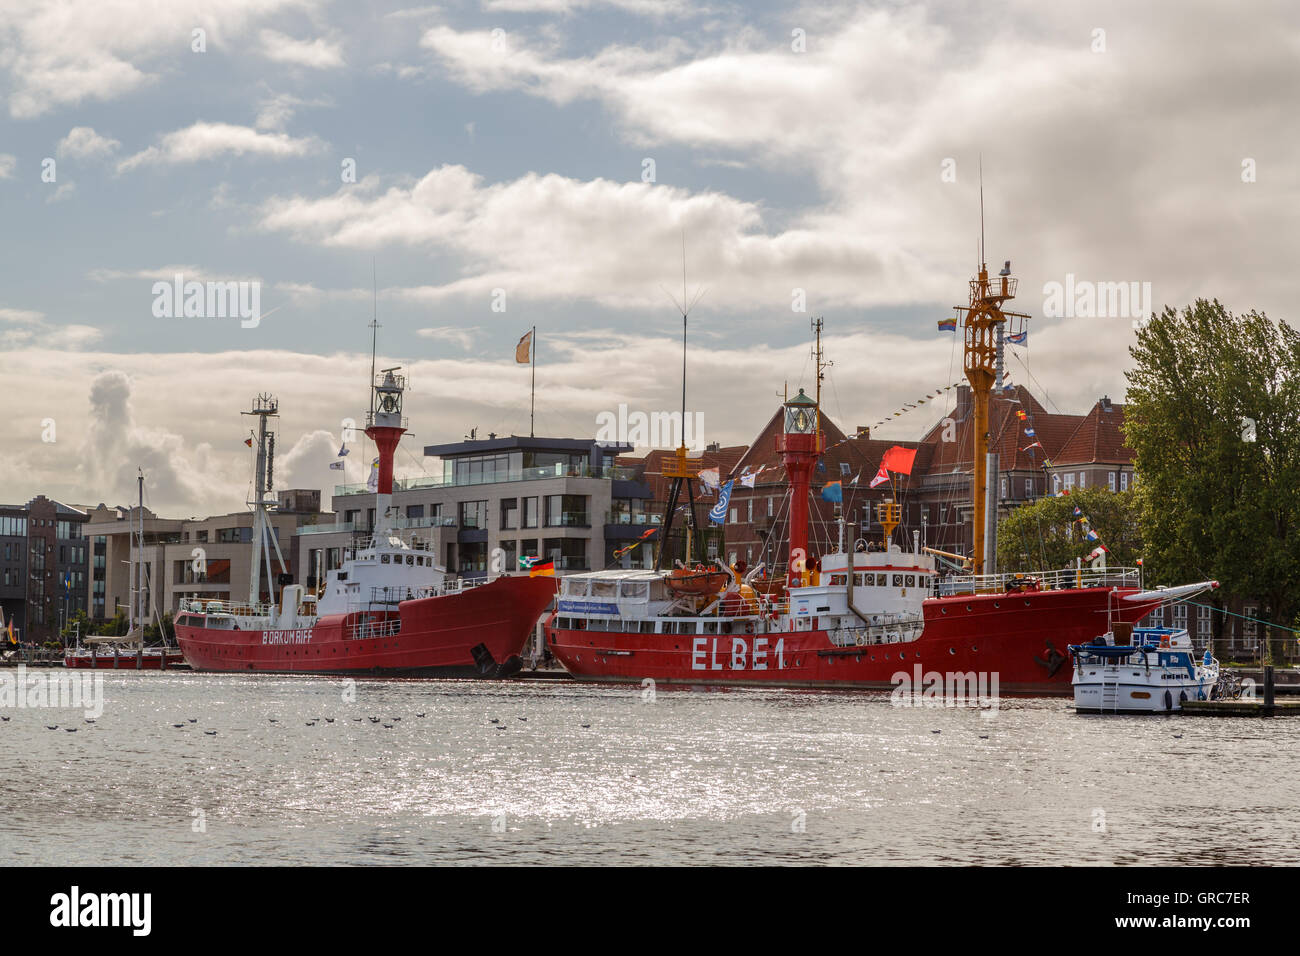 Lightship Borkum Riff And Elbe 1 In The Old Inland Port Stock Photo